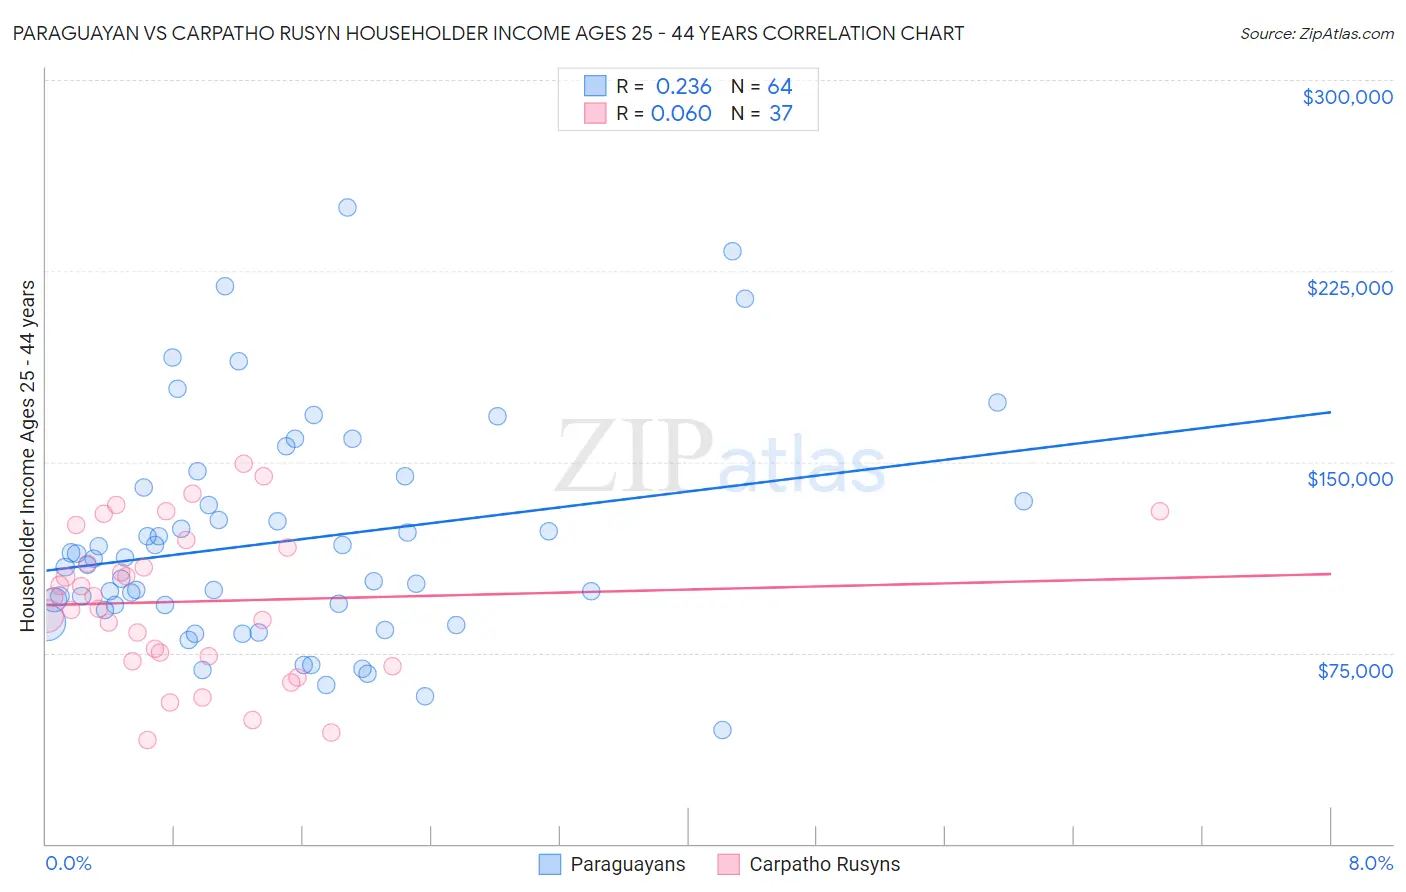 Paraguayan vs Carpatho Rusyn Householder Income Ages 25 - 44 years